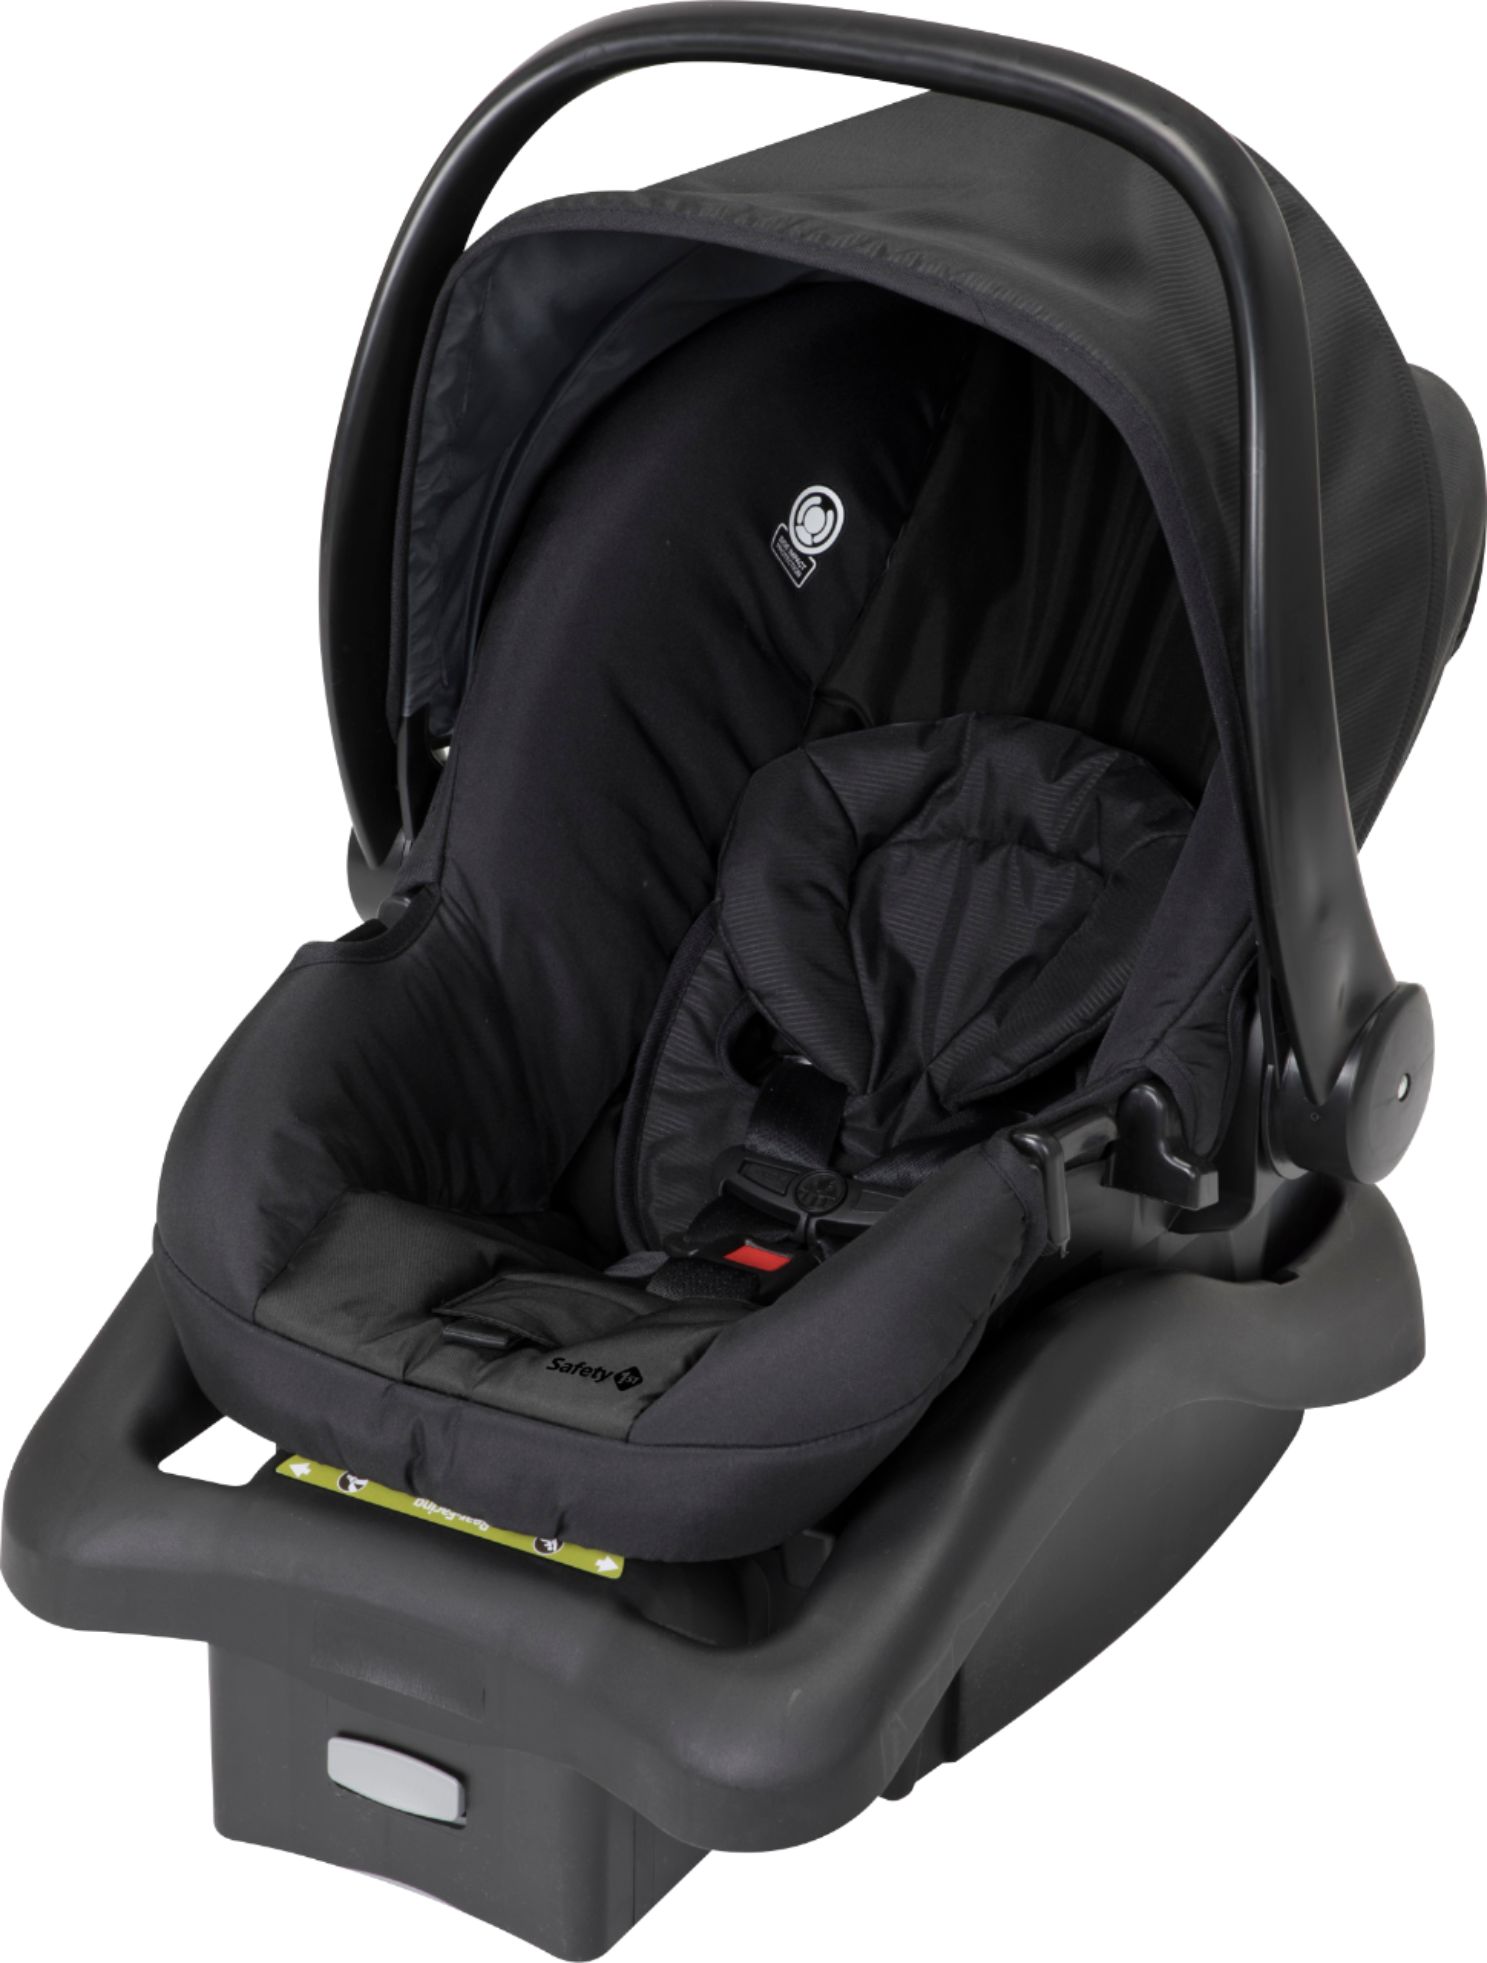 Angle View: Safety 1st - RIVA™ 6-in-1 Flex Modular Travel System - Grey